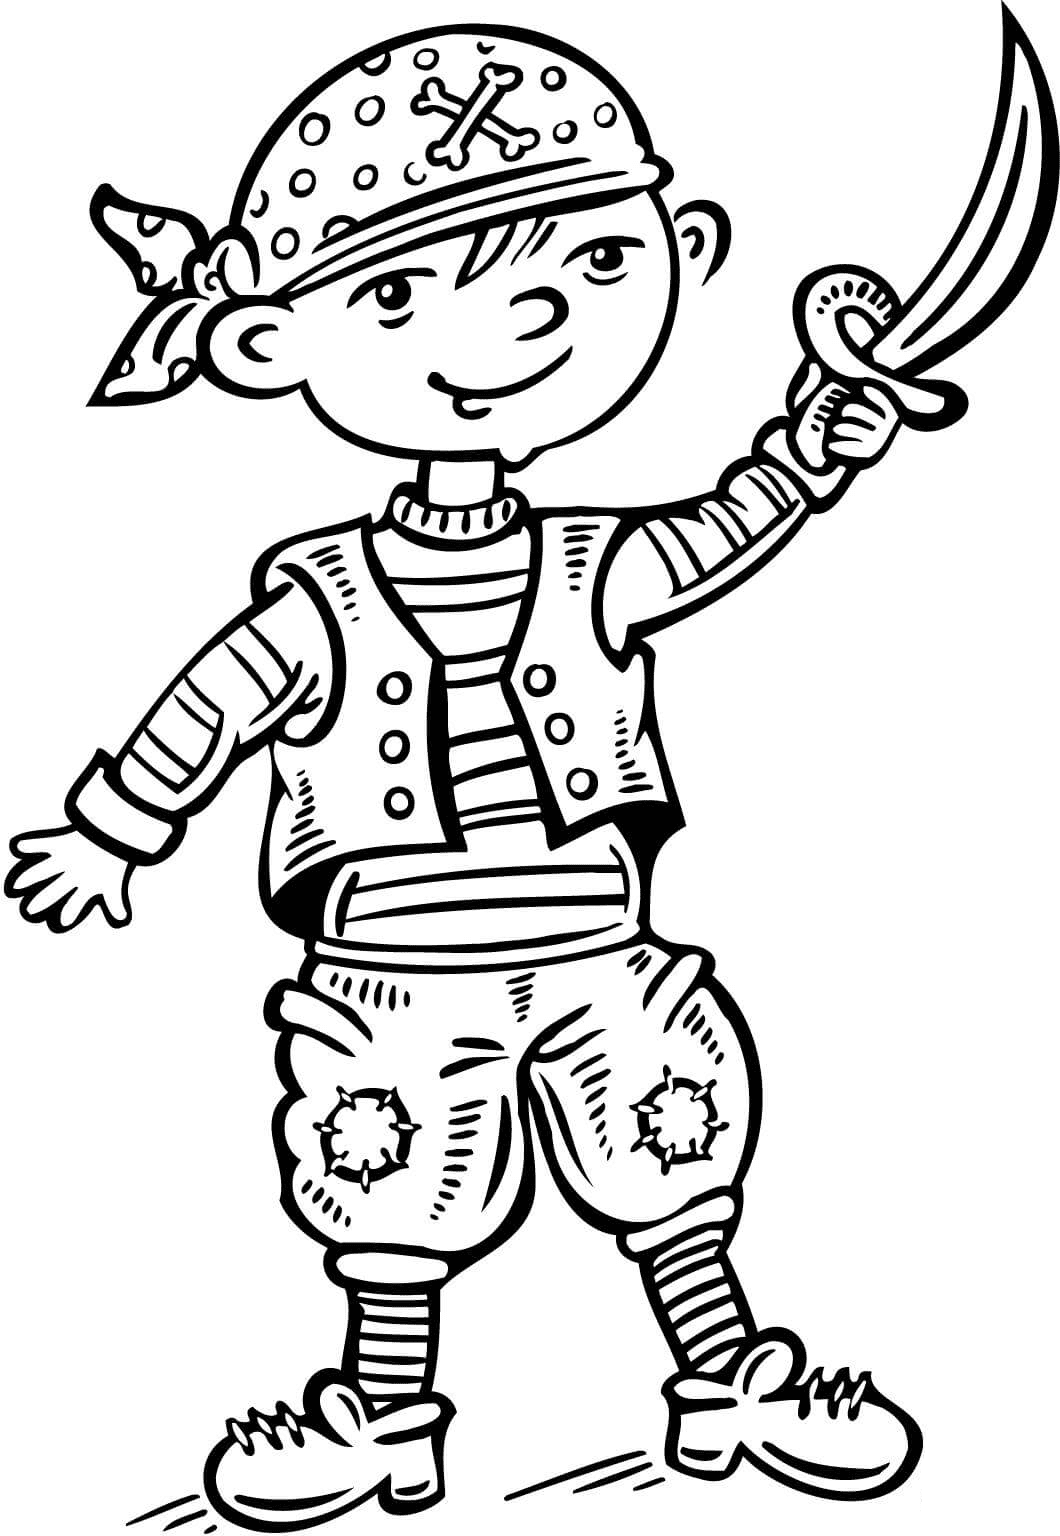 Child Dressed up like a Pirate Coloring Page